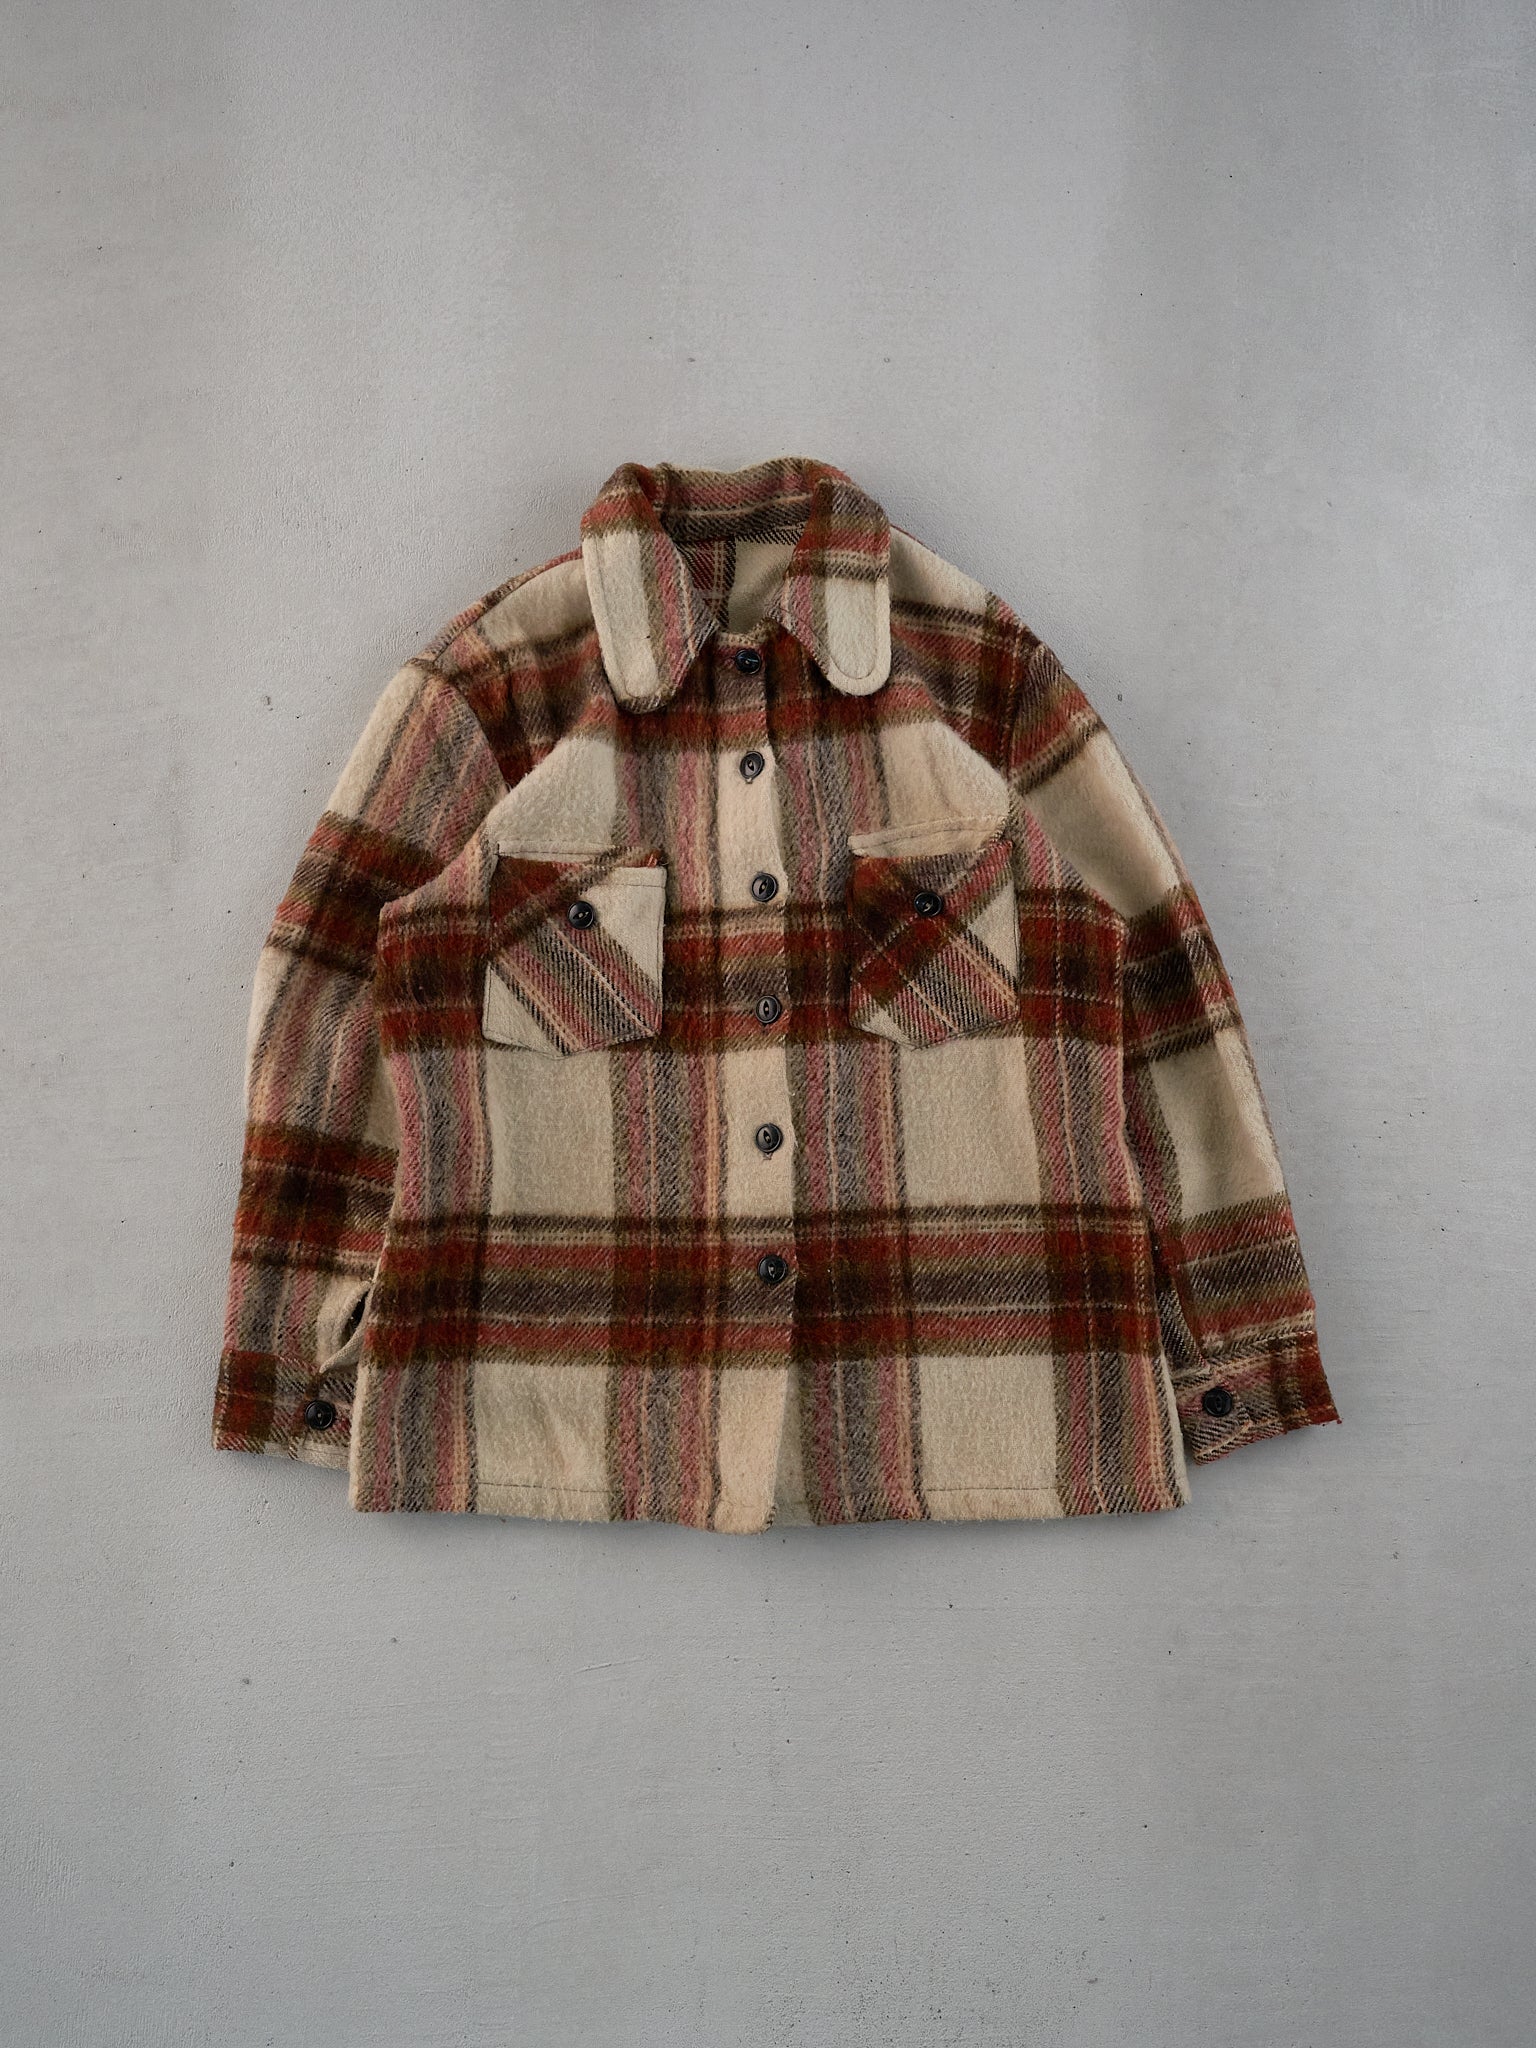 Vintage 80s Beige and Brown Knit Plaid Collared Button Up (M)